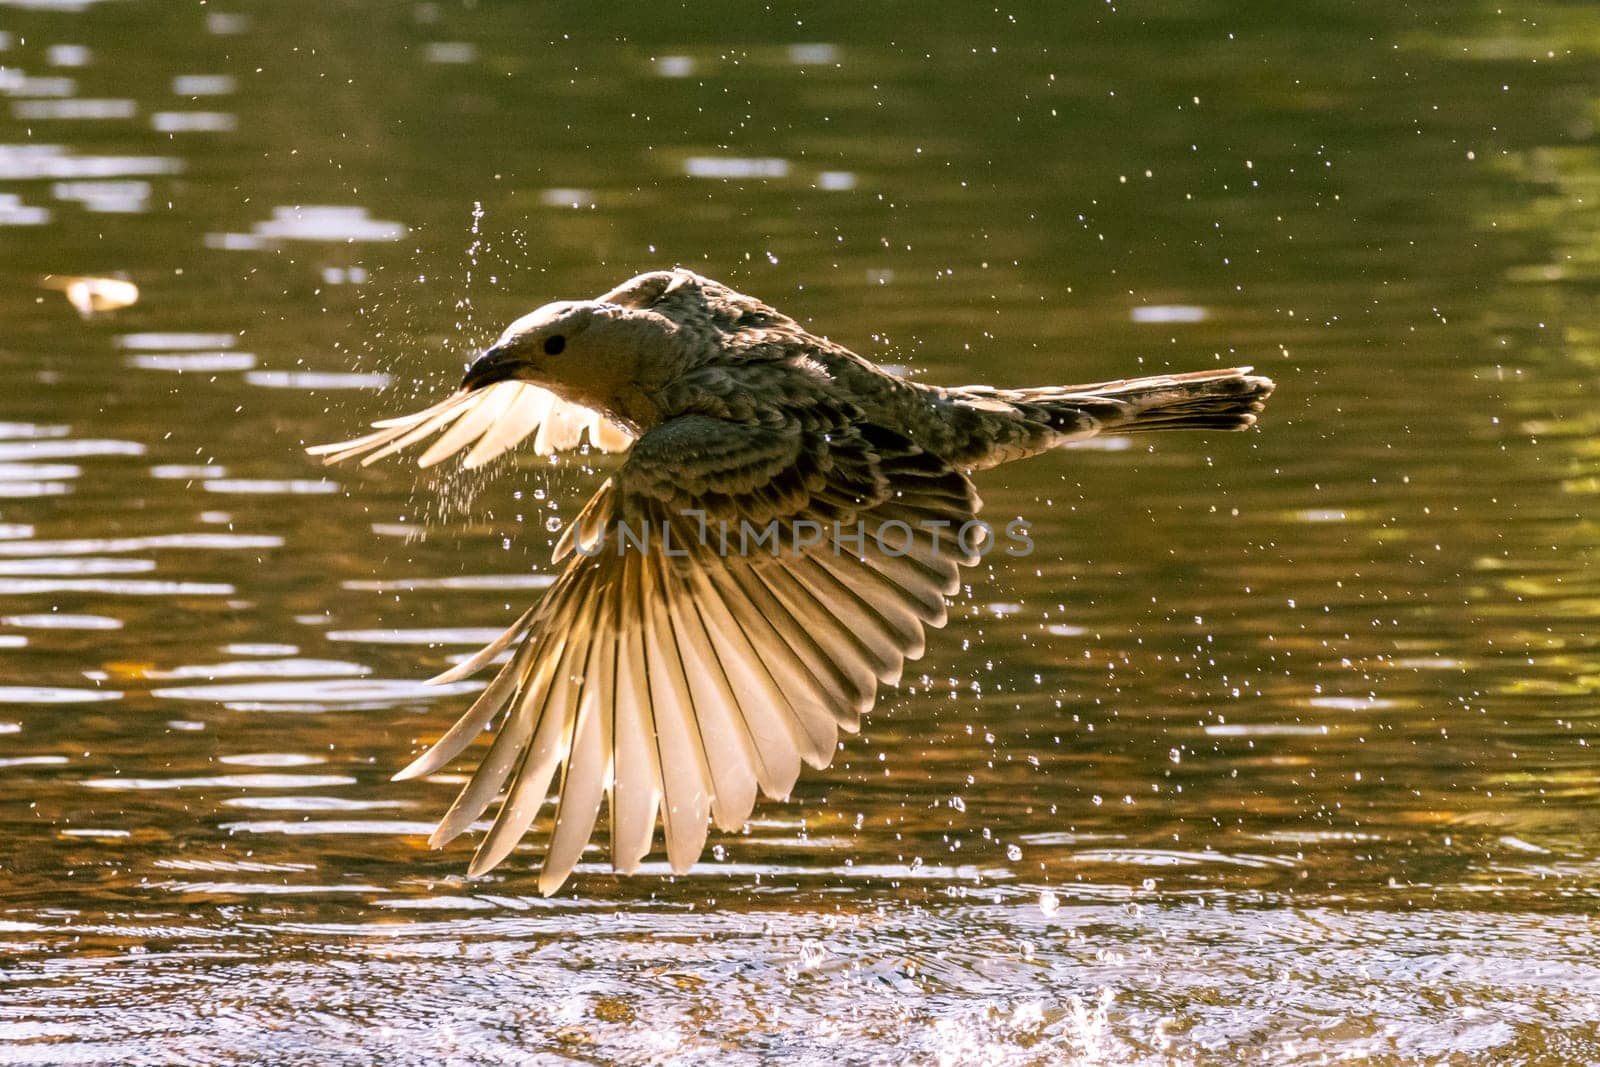 The great bowerbird, Chlamydera nuchalis, is a common and conspicuous resident of northern Australia, captured midflight with wing feathers outstretched above a lake in a small gorge.